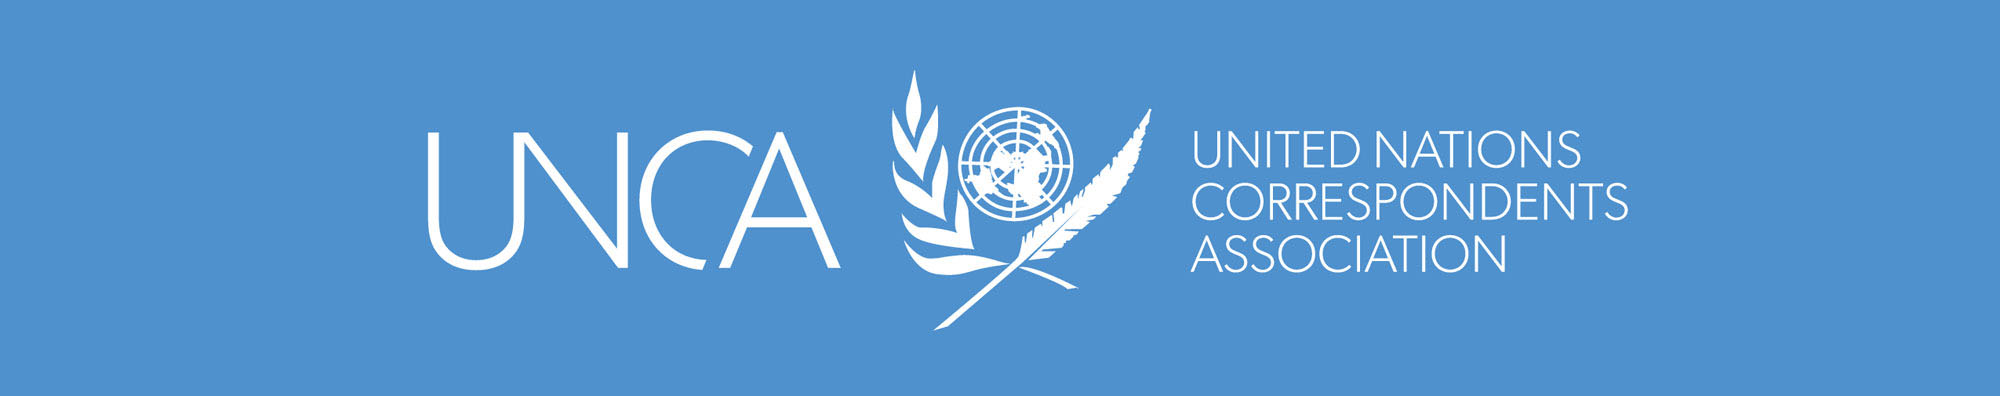 The United Nations Correspondents Association